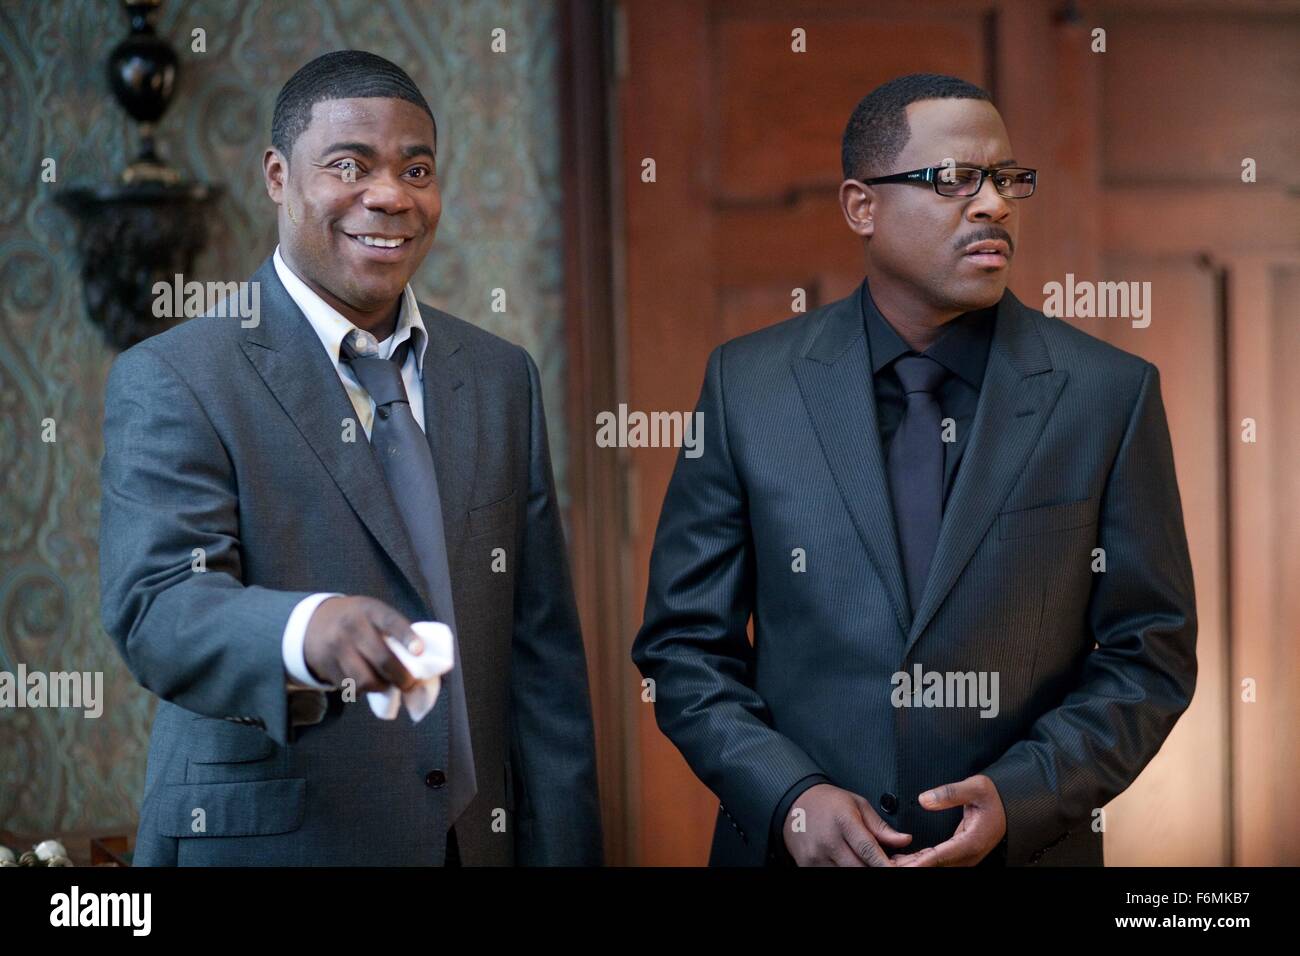 RELEASE DATE: April 16, 2010. MOVIE TITLE: Death At A Funeral. STUDIO: Parabolic Pictures Inc. PLOT: A funeral ceremony turns into a debacle of exposed family secrets and misplaced bodies. PICTURED: TRACY MORGAN as Norman and MARTIN LAWRENCE as Ryan. Stock Photo